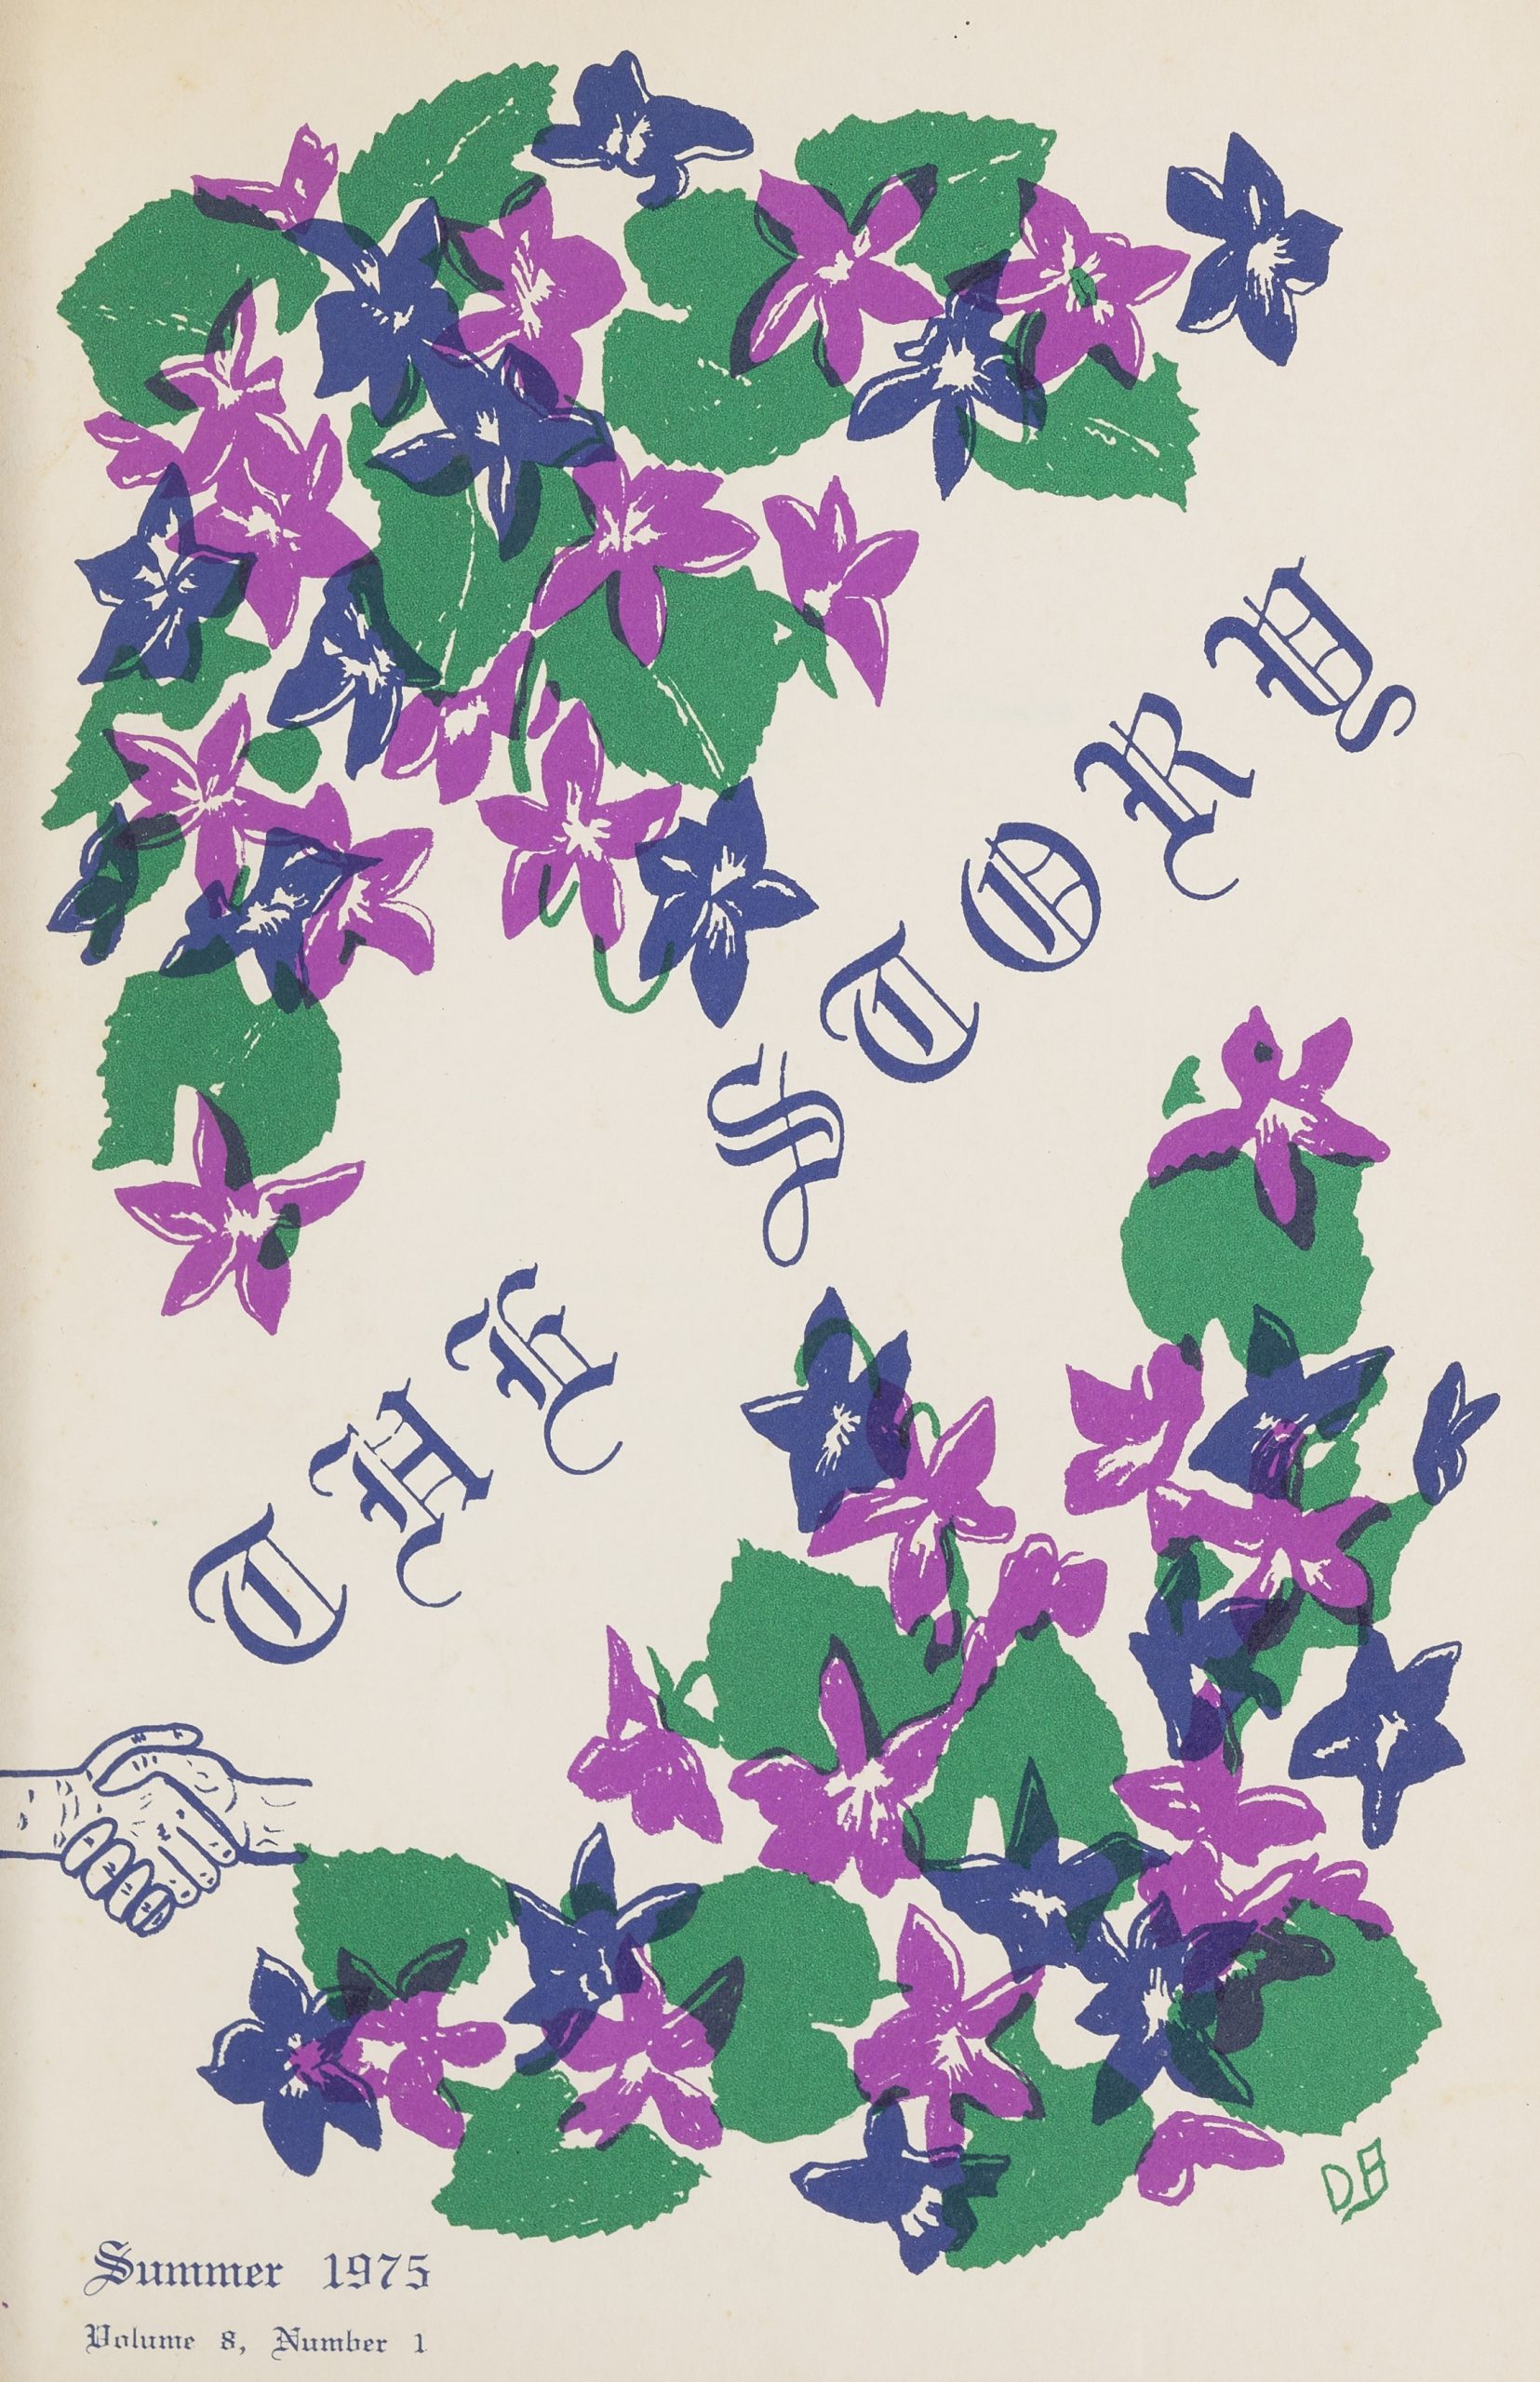 The Story cover with blue and purple flowers with leaves in the top left and bottom right corner. There is also a graphic of two hands shaking on the left side of the page towards the bottom.